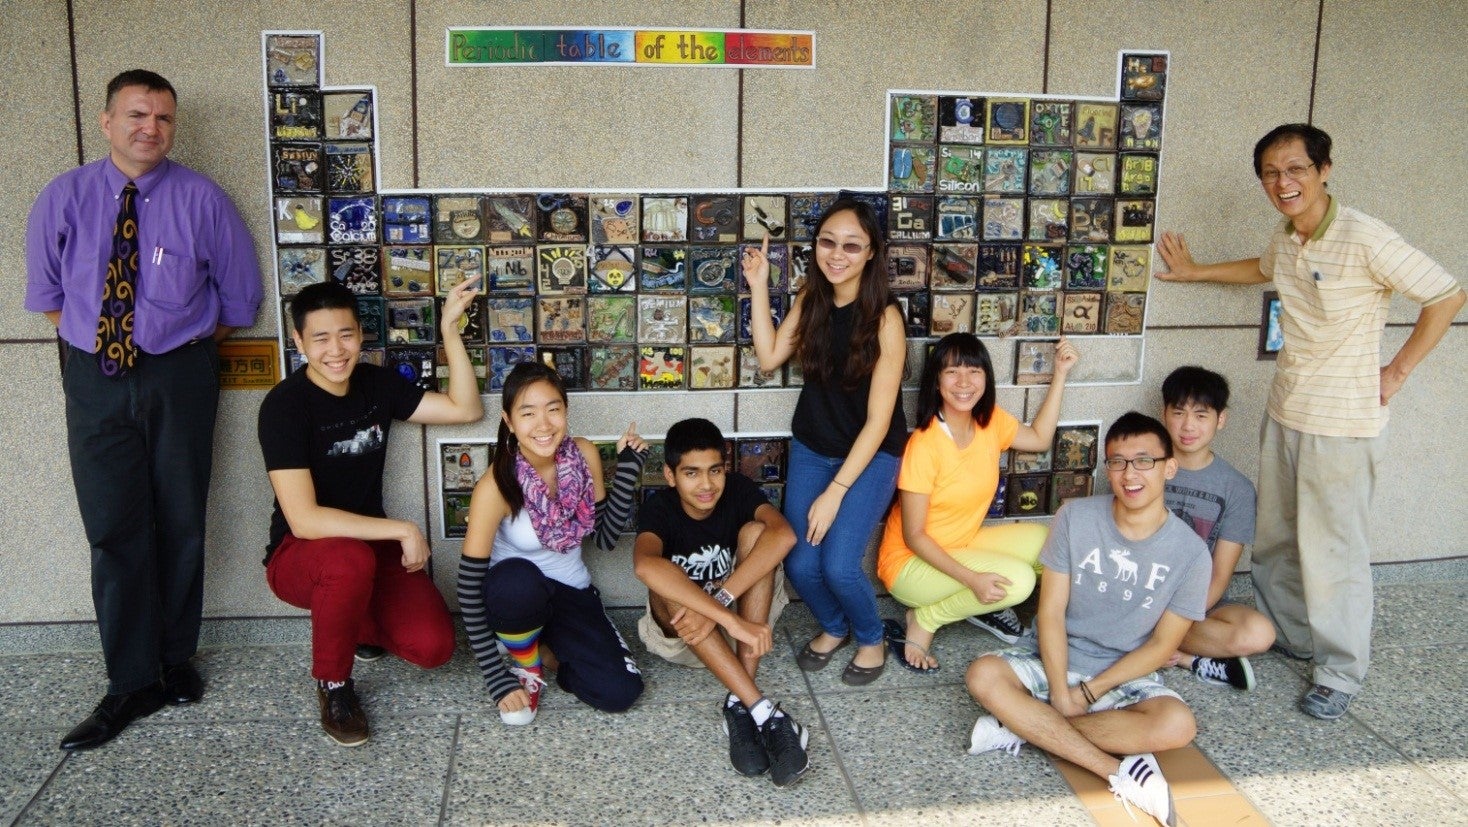 Students and two teachers standing in front of periodic table on wall.